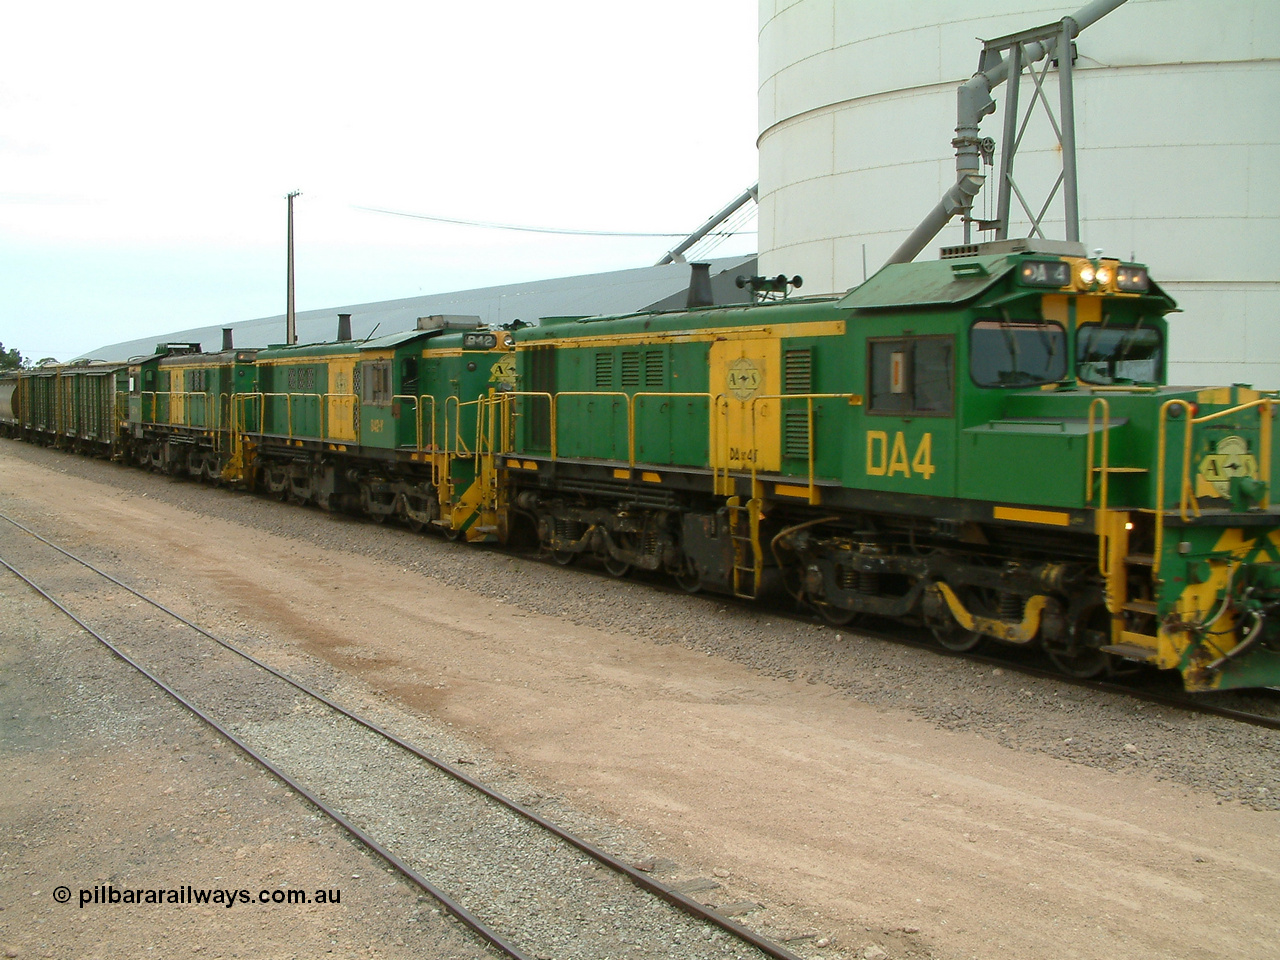 030407 114338
Poochera, empty grain train arrives behind a trio of former Australian National Co-Co locomotives with rebuilt former AE Goodwin ALCo model DL531 830 class ex 839, serial no. 83730, rebuilt by Port Augusta Workshops to DA class, DA 4 leading two AE Goodwin ALCo model DL531 830 class units 842, serial no. 84140 and 851 serial no. 84137, 851 having been on the Eyre Peninsula since delivered in 1962, to shunt off empty waggons and pick up the loaded ones. 7th April 2003.
Keywords: DA-class;DA4;83730;Port-Augusta-WS;ALCo;DL531G/1;830-class;839;rebuild;